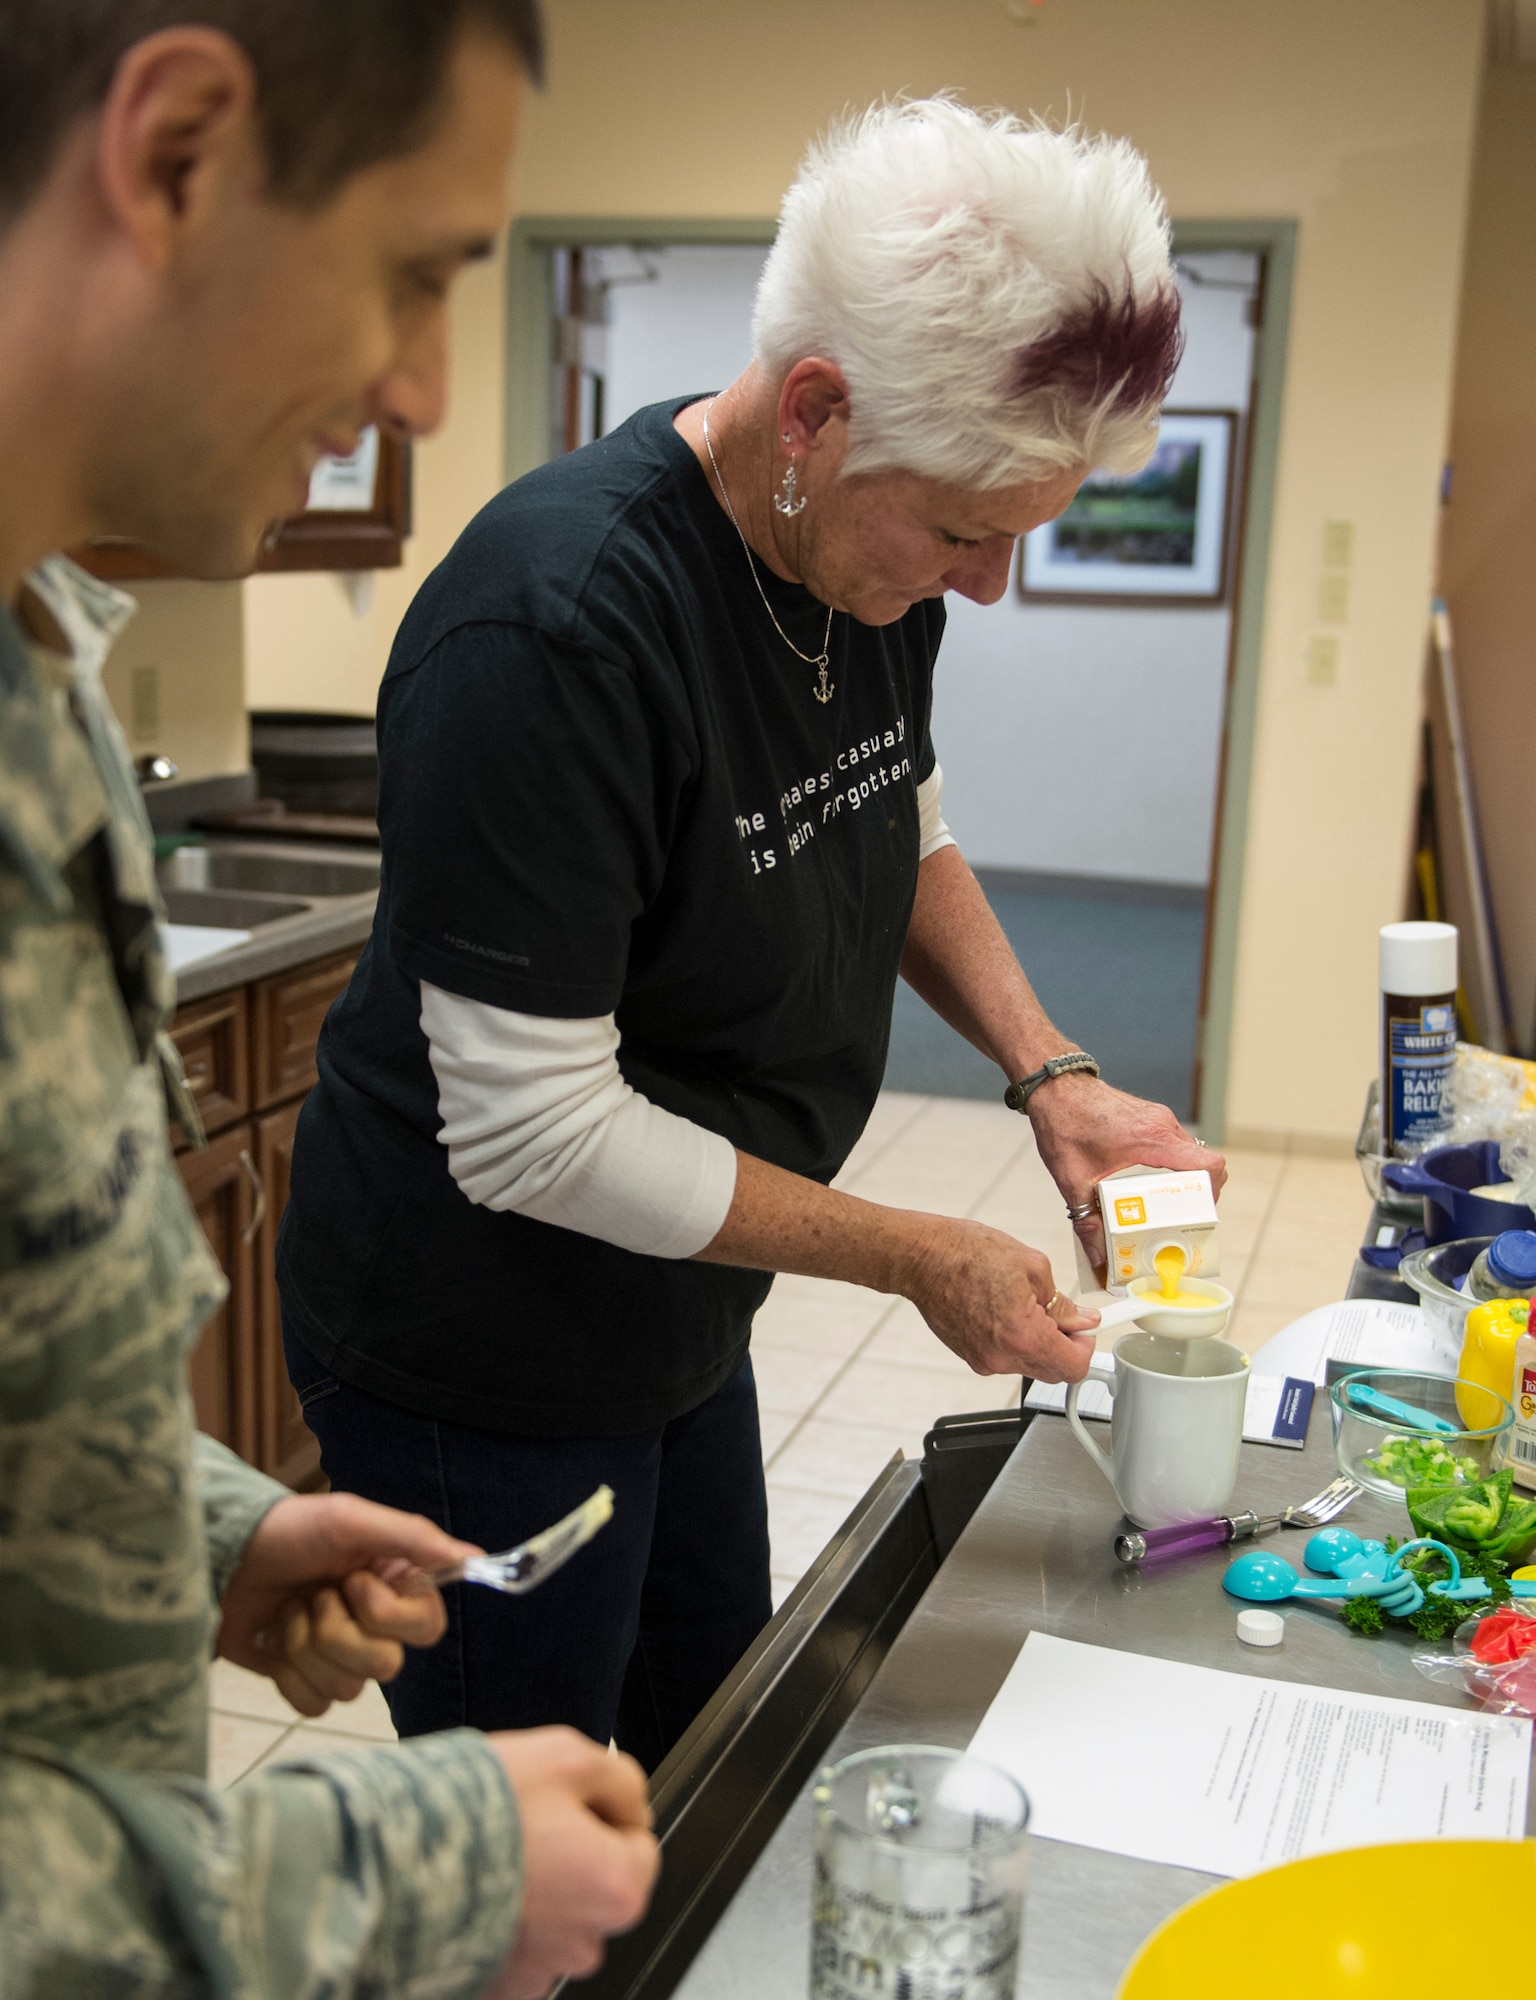 Dawn Nickerson-Banez, local bakery owner and honorary commander, measures egg mixture for quiche in a mug Jan. 21, 2015, during a microwave cooking class for service members assigned to Air Force Mortuary Affairs Operations, Dover Air Force Base, Del. The class demonstrated the healthy cooking options while living in a dorm or lodging environment. (U.S. Air Force photo by Staff Sgt. John E. Ayre)